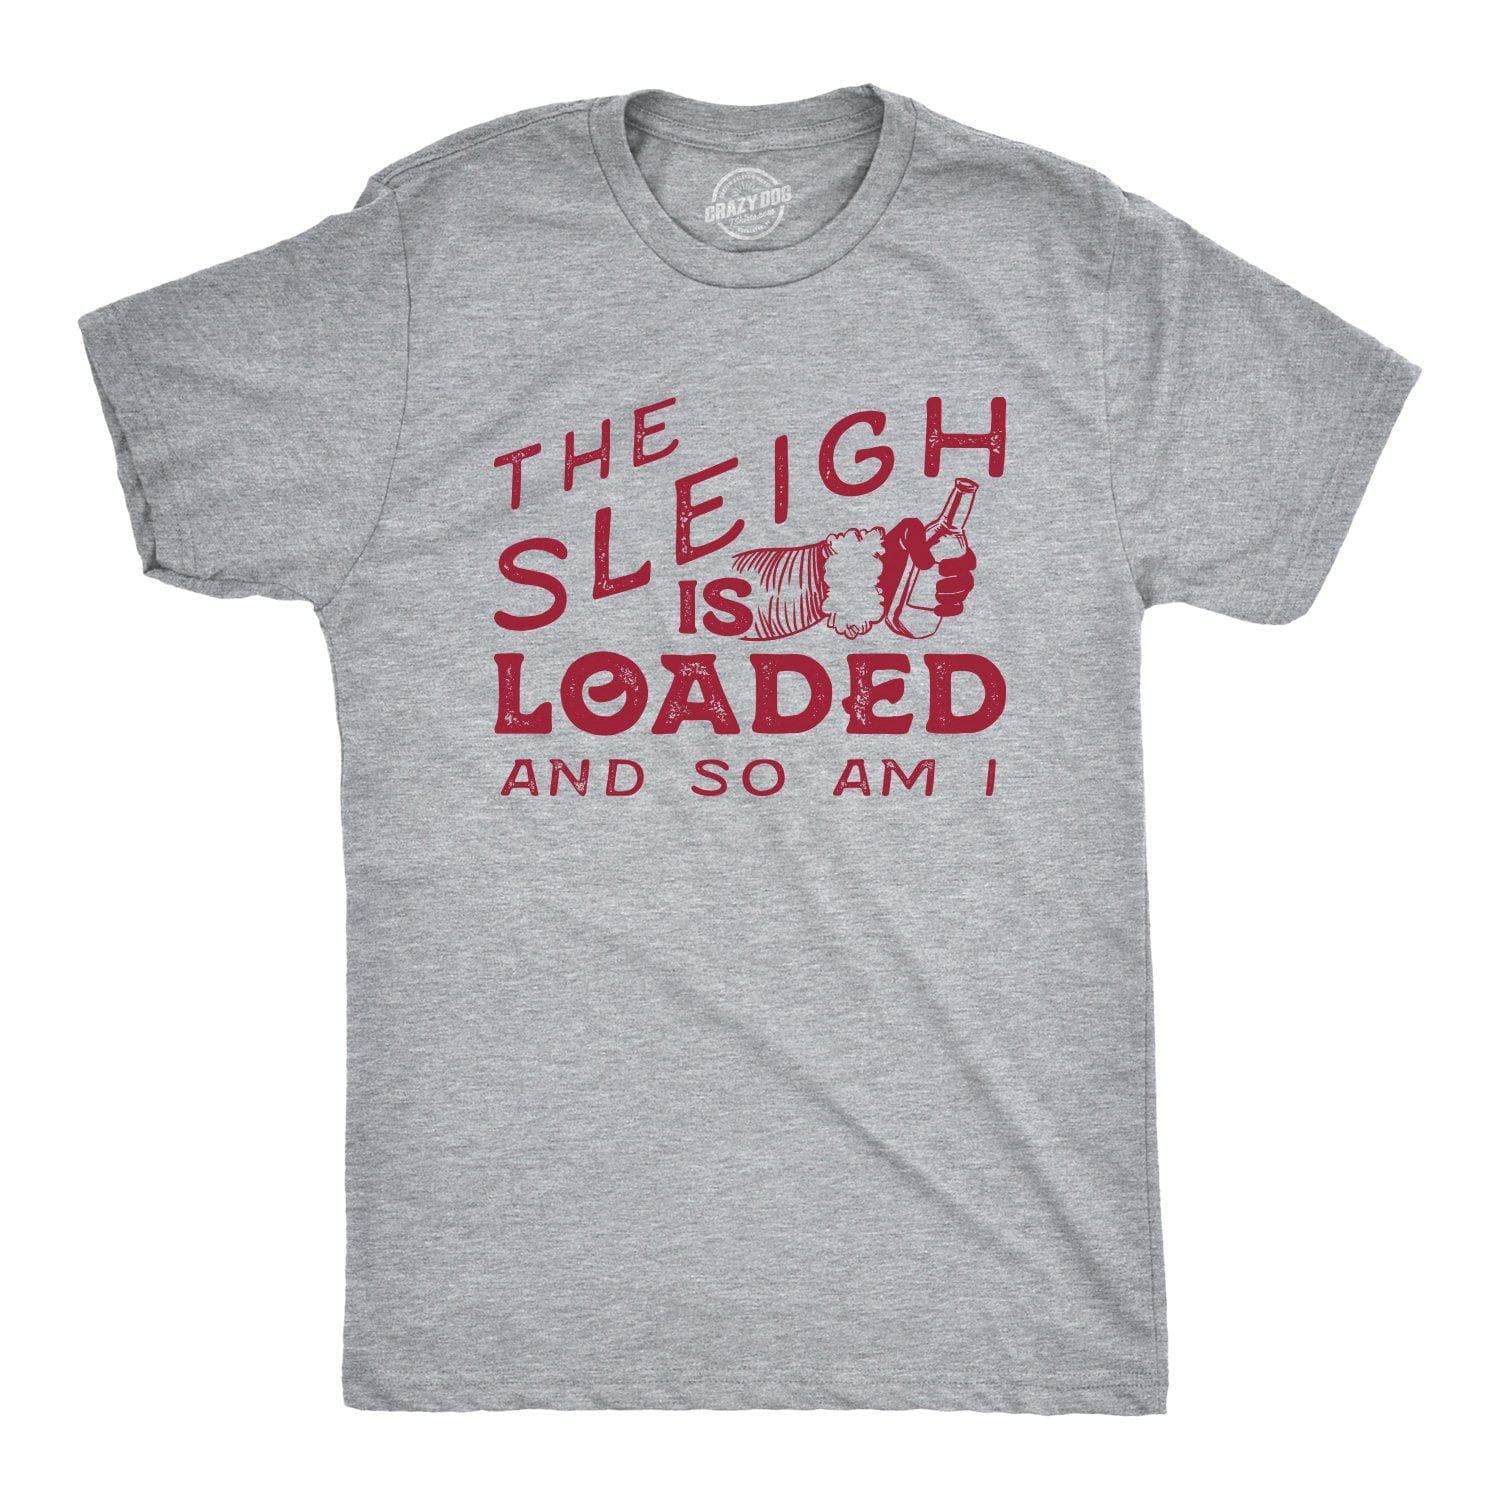 The Sleigh Is Loaded And So Am I Men's Tshirt - Crazy Dog T-Shirts